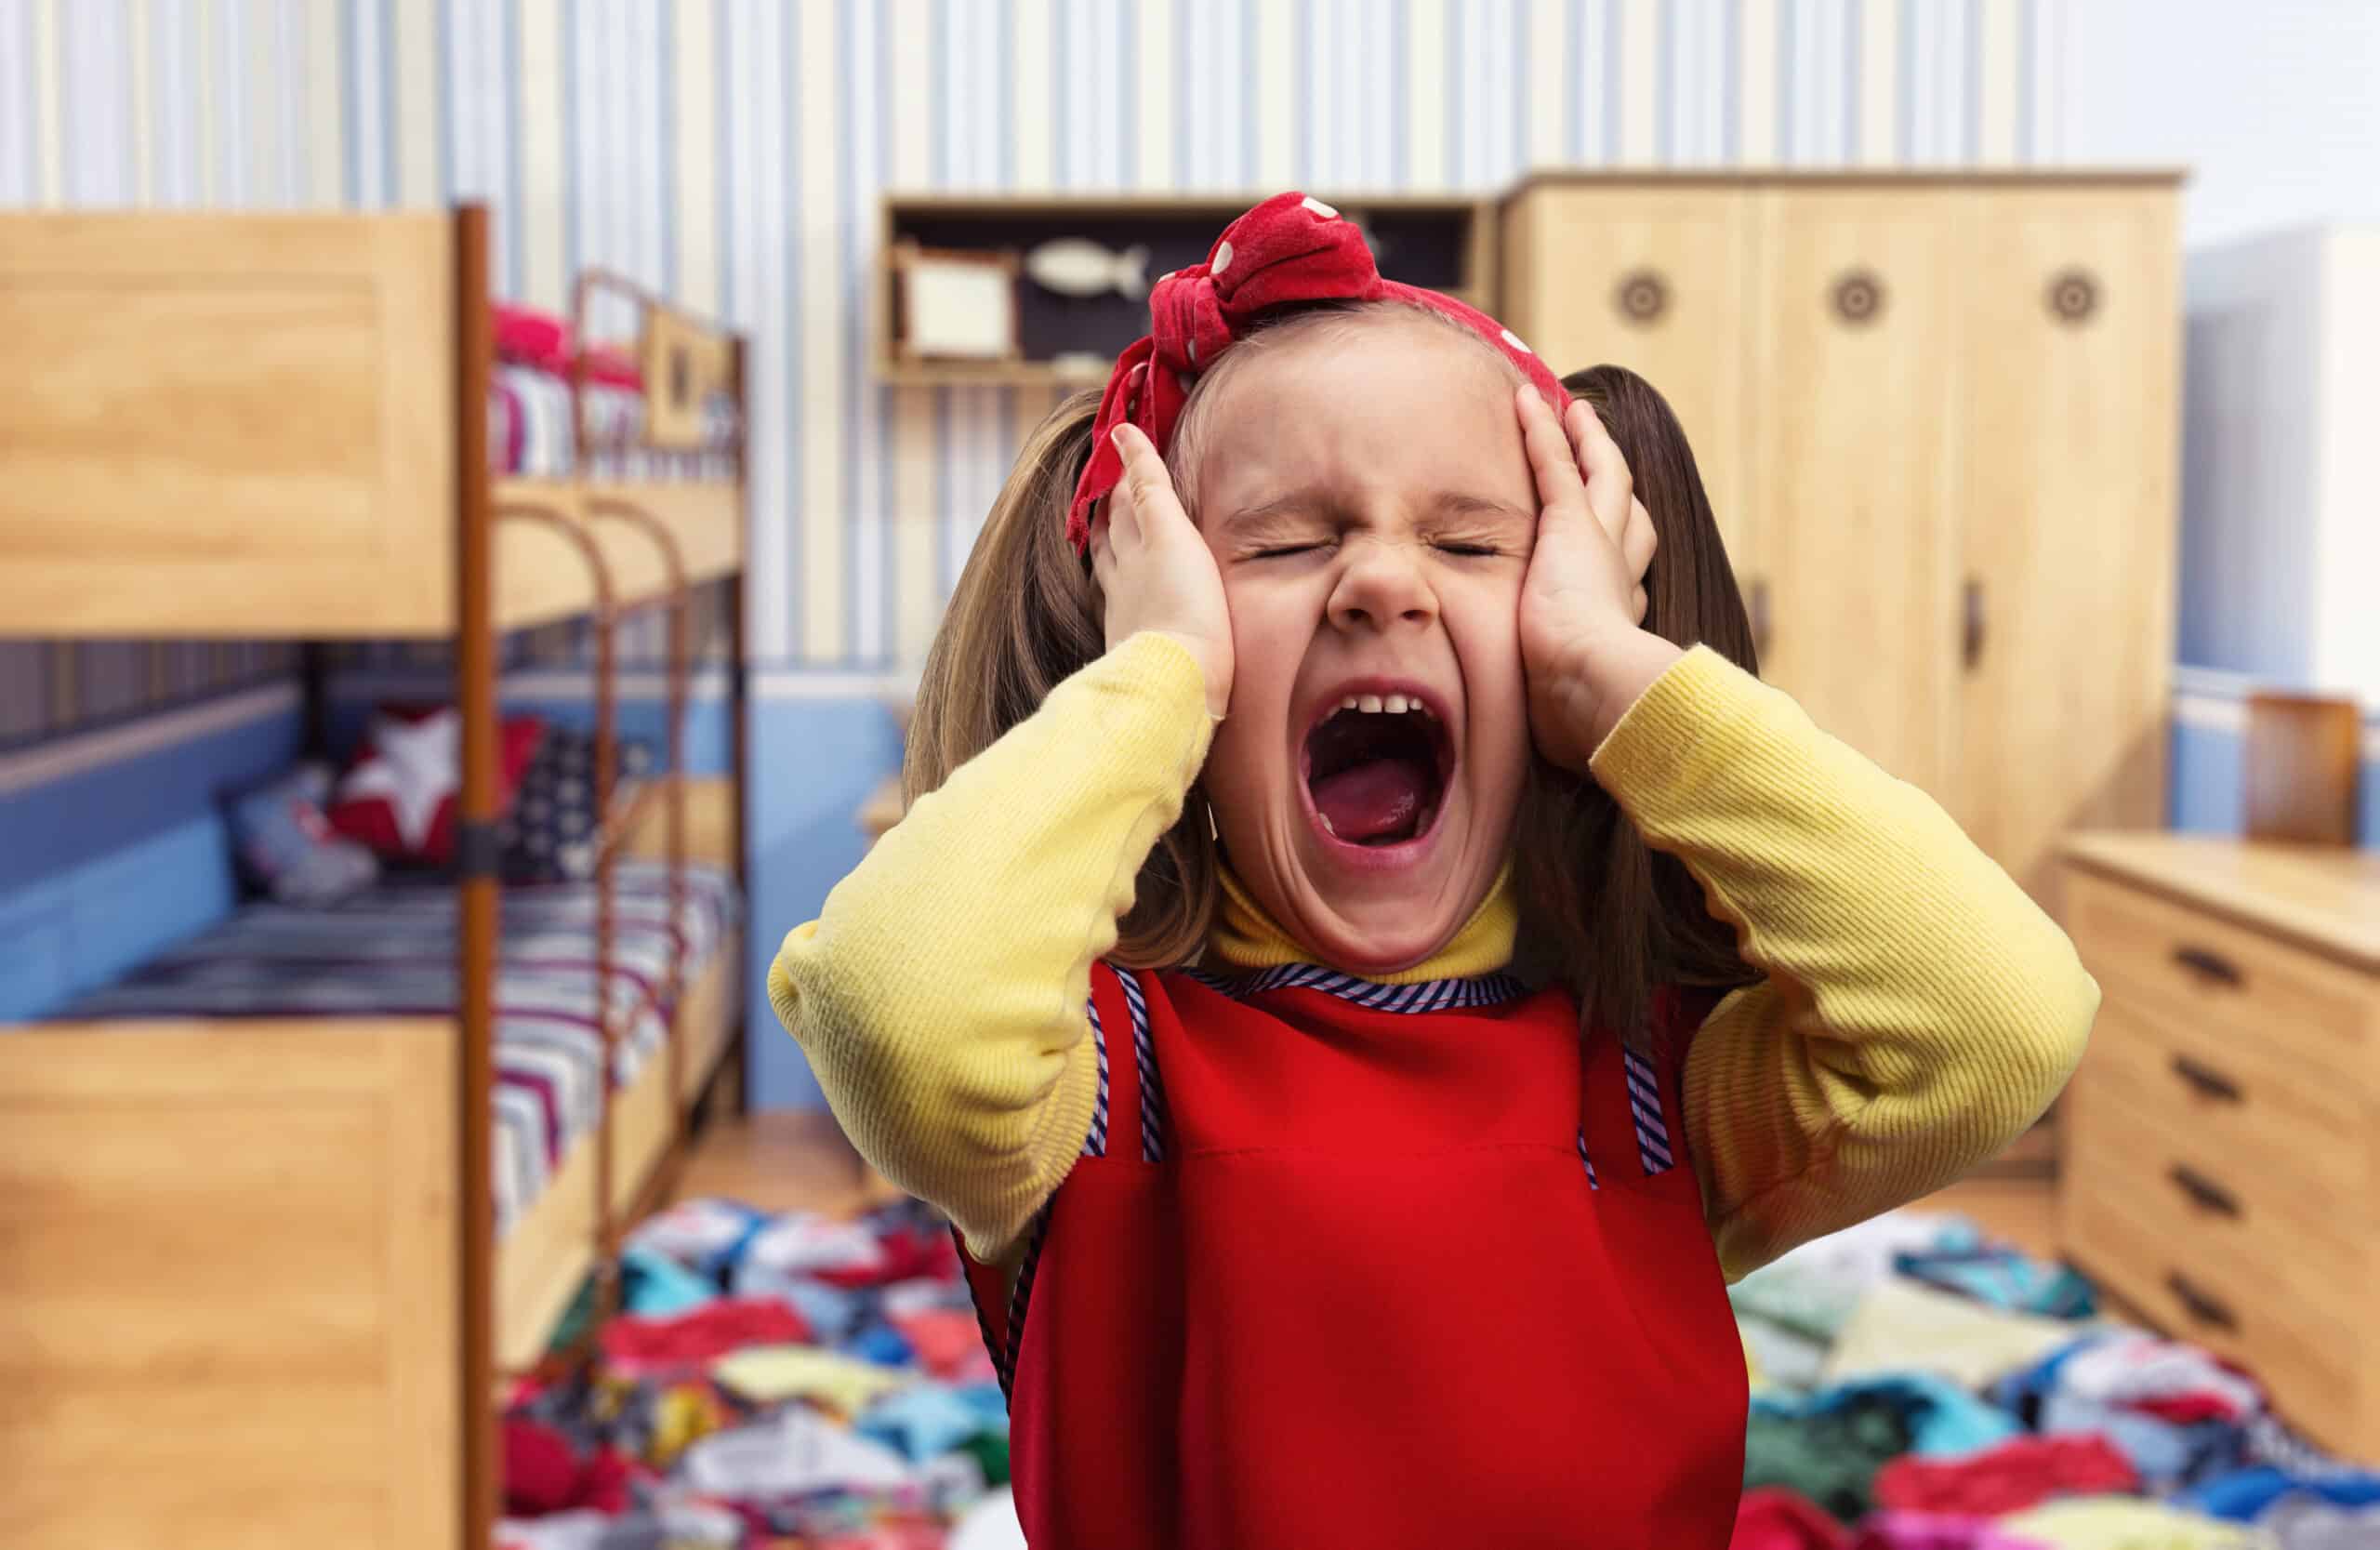 4 Steps to Calm You And Your Child During Tantrums, Hitting or Yelling Hurtful Things